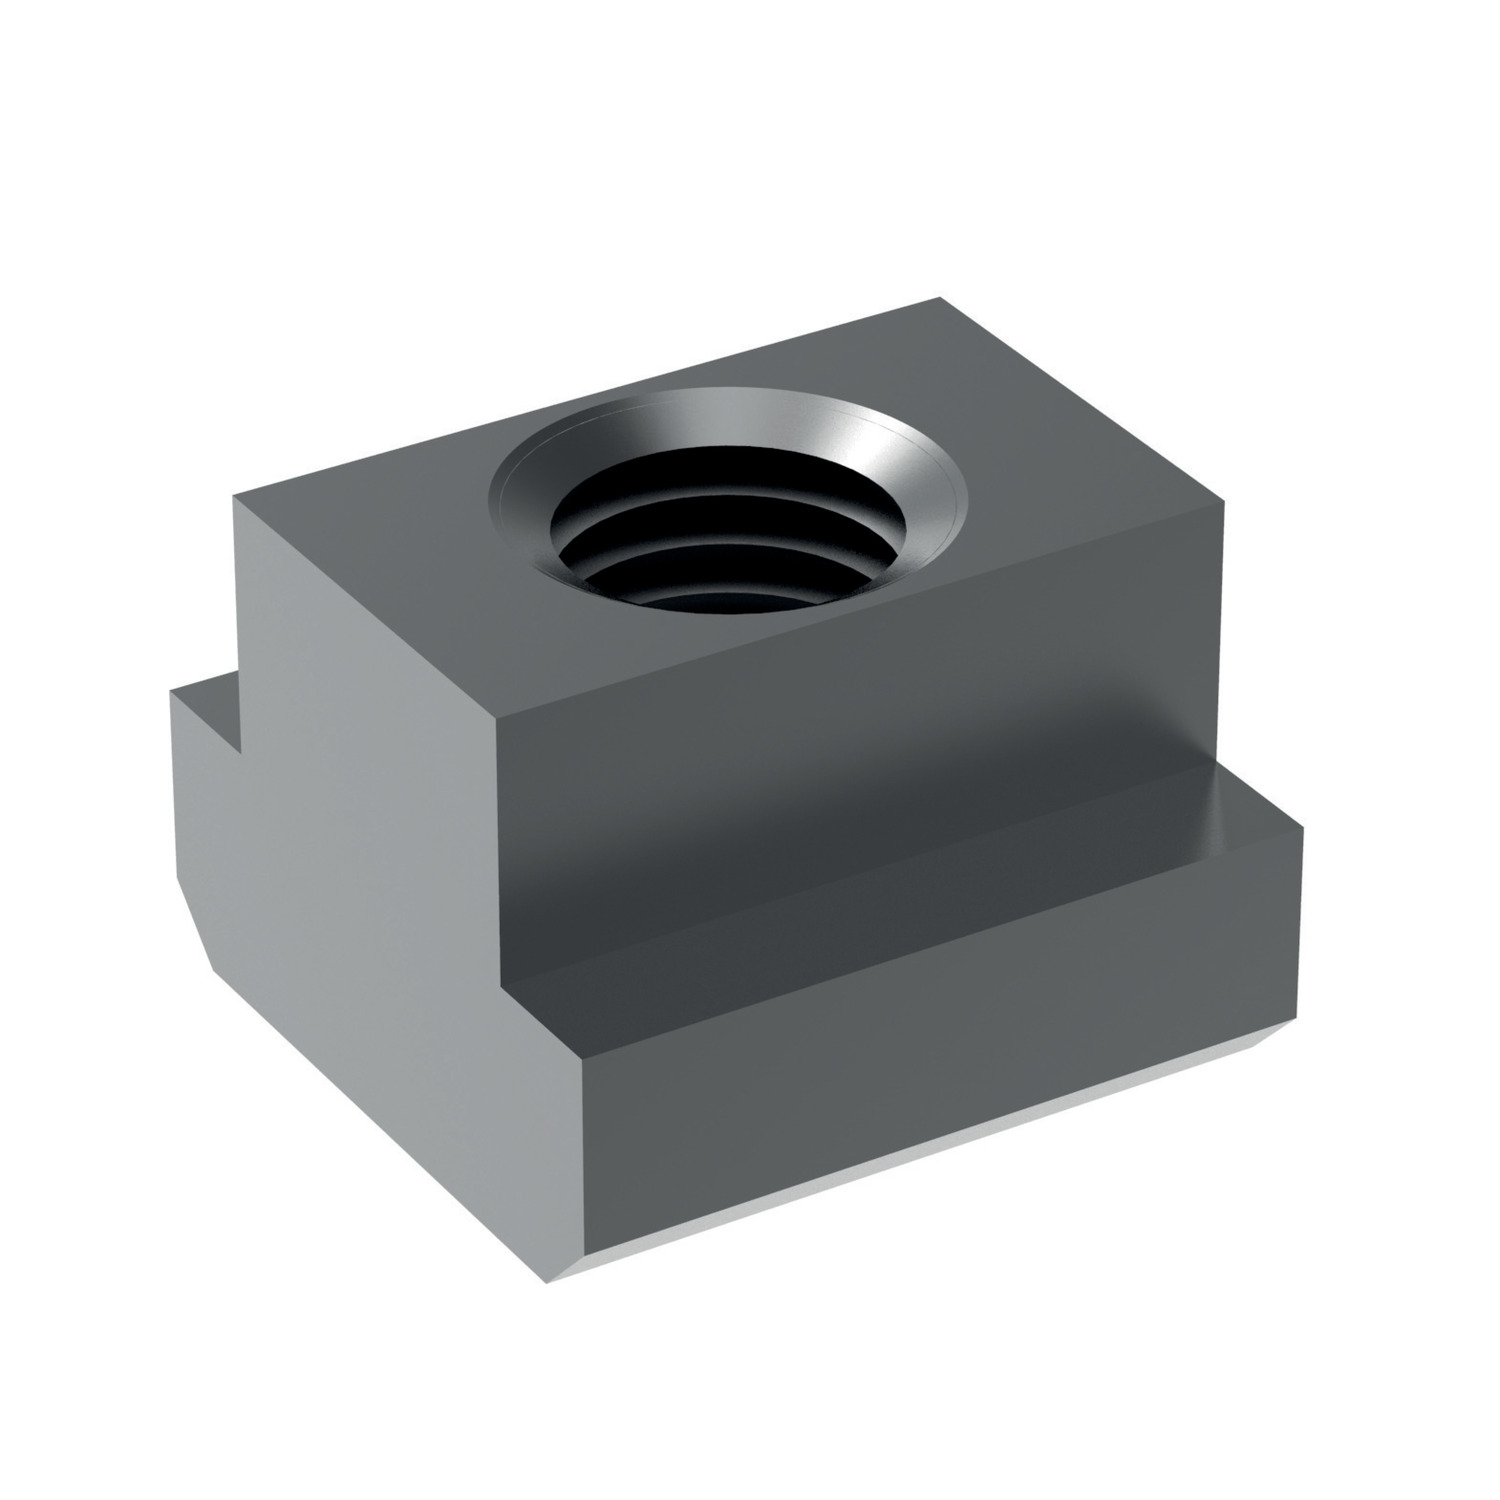 T-Nuts Strength class 10, heat treated steel t-nuts made to din 508. Free CAD models are available for our t-nut products.